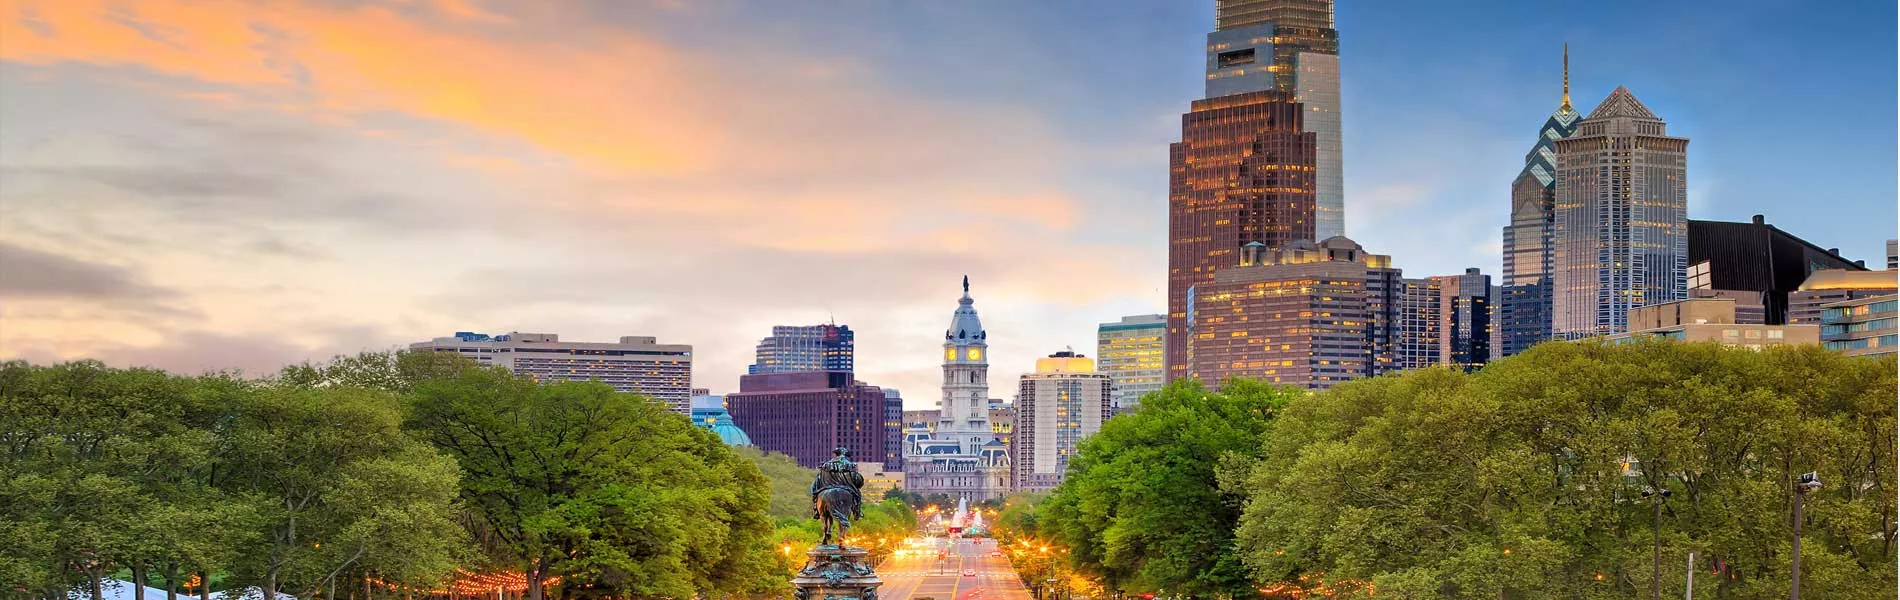 2018 ISPE Annual Meeting & Expo: Welcome to Philly